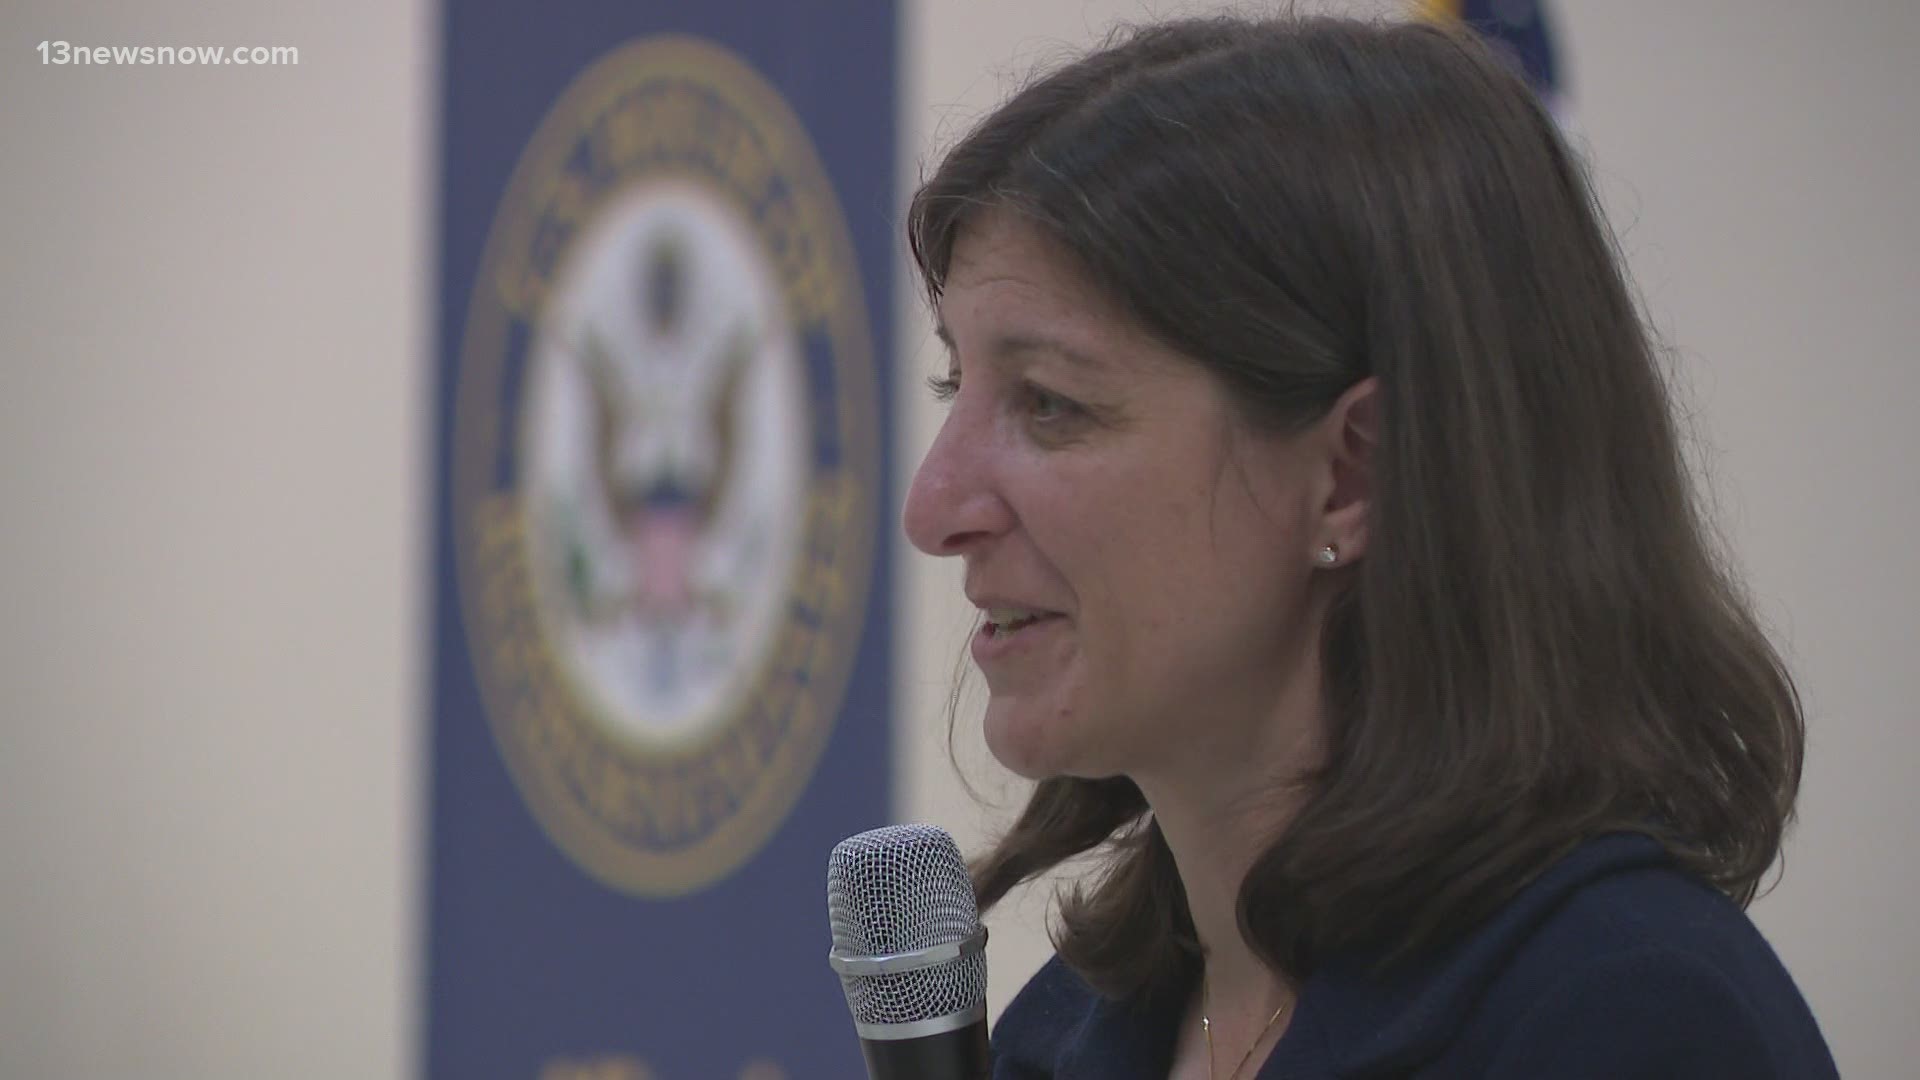 Congresswoman Elaine Luria addressed the rise in gun violence at a packed town hall in Virginia Beach.